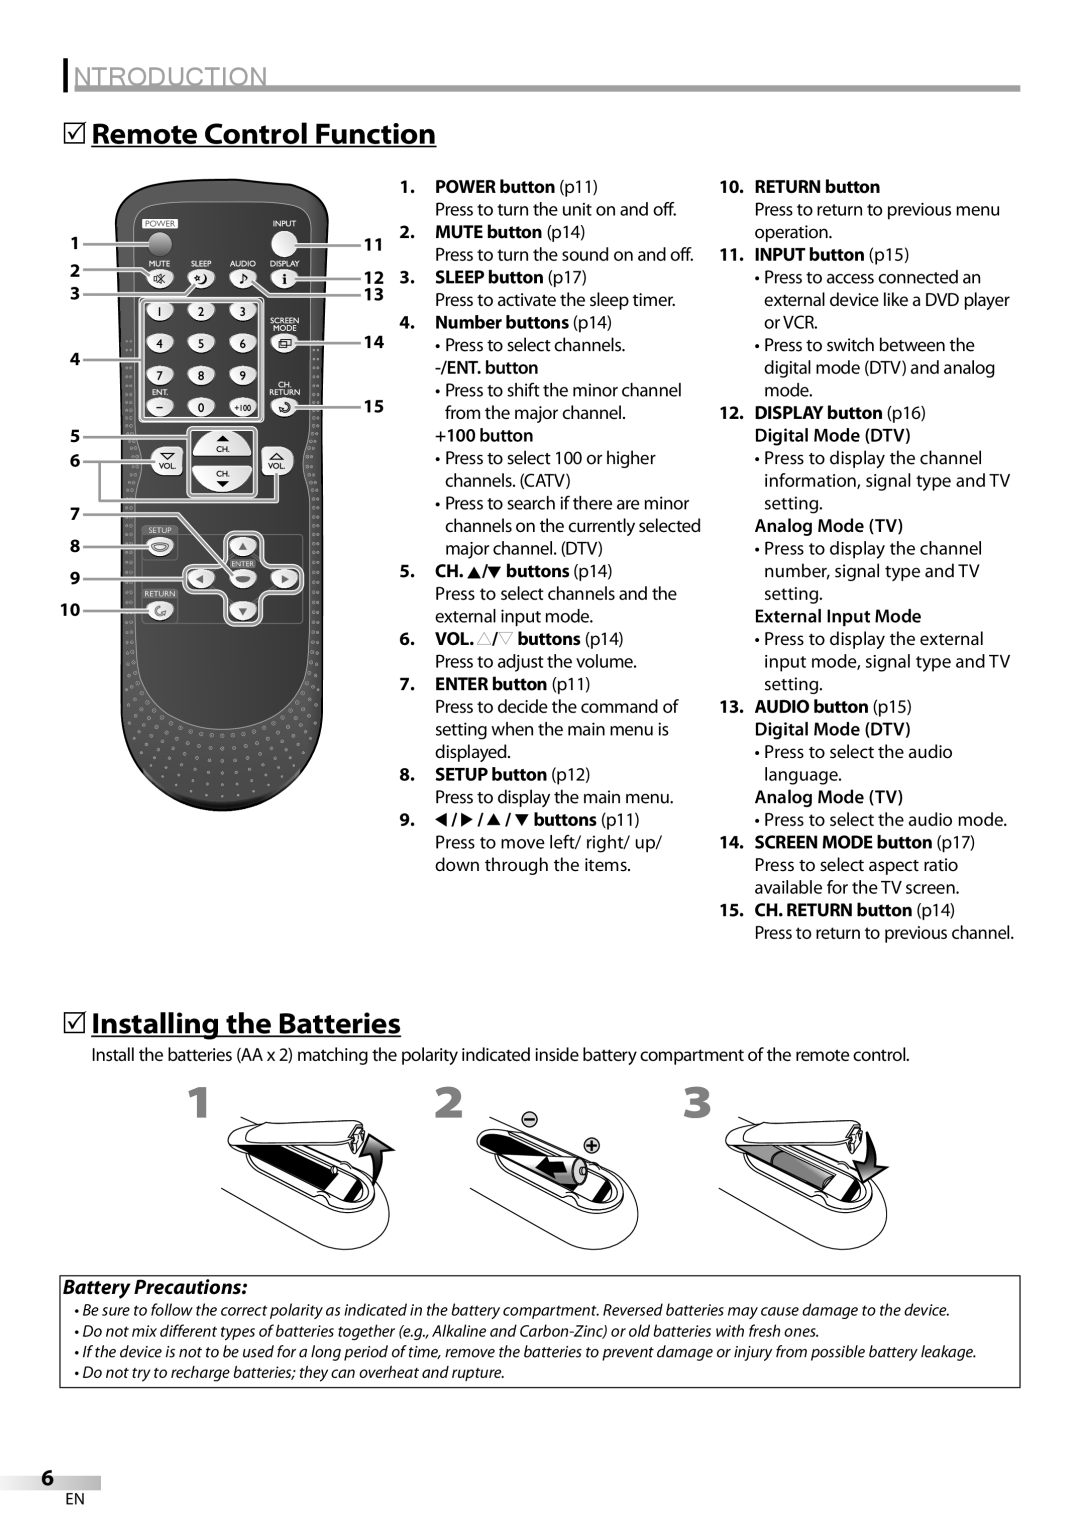 Sylvania LC200SL9 A 5Remote Control Function, 5Installing the Batteries, Battery Precautions, Introduction, ENT. button 